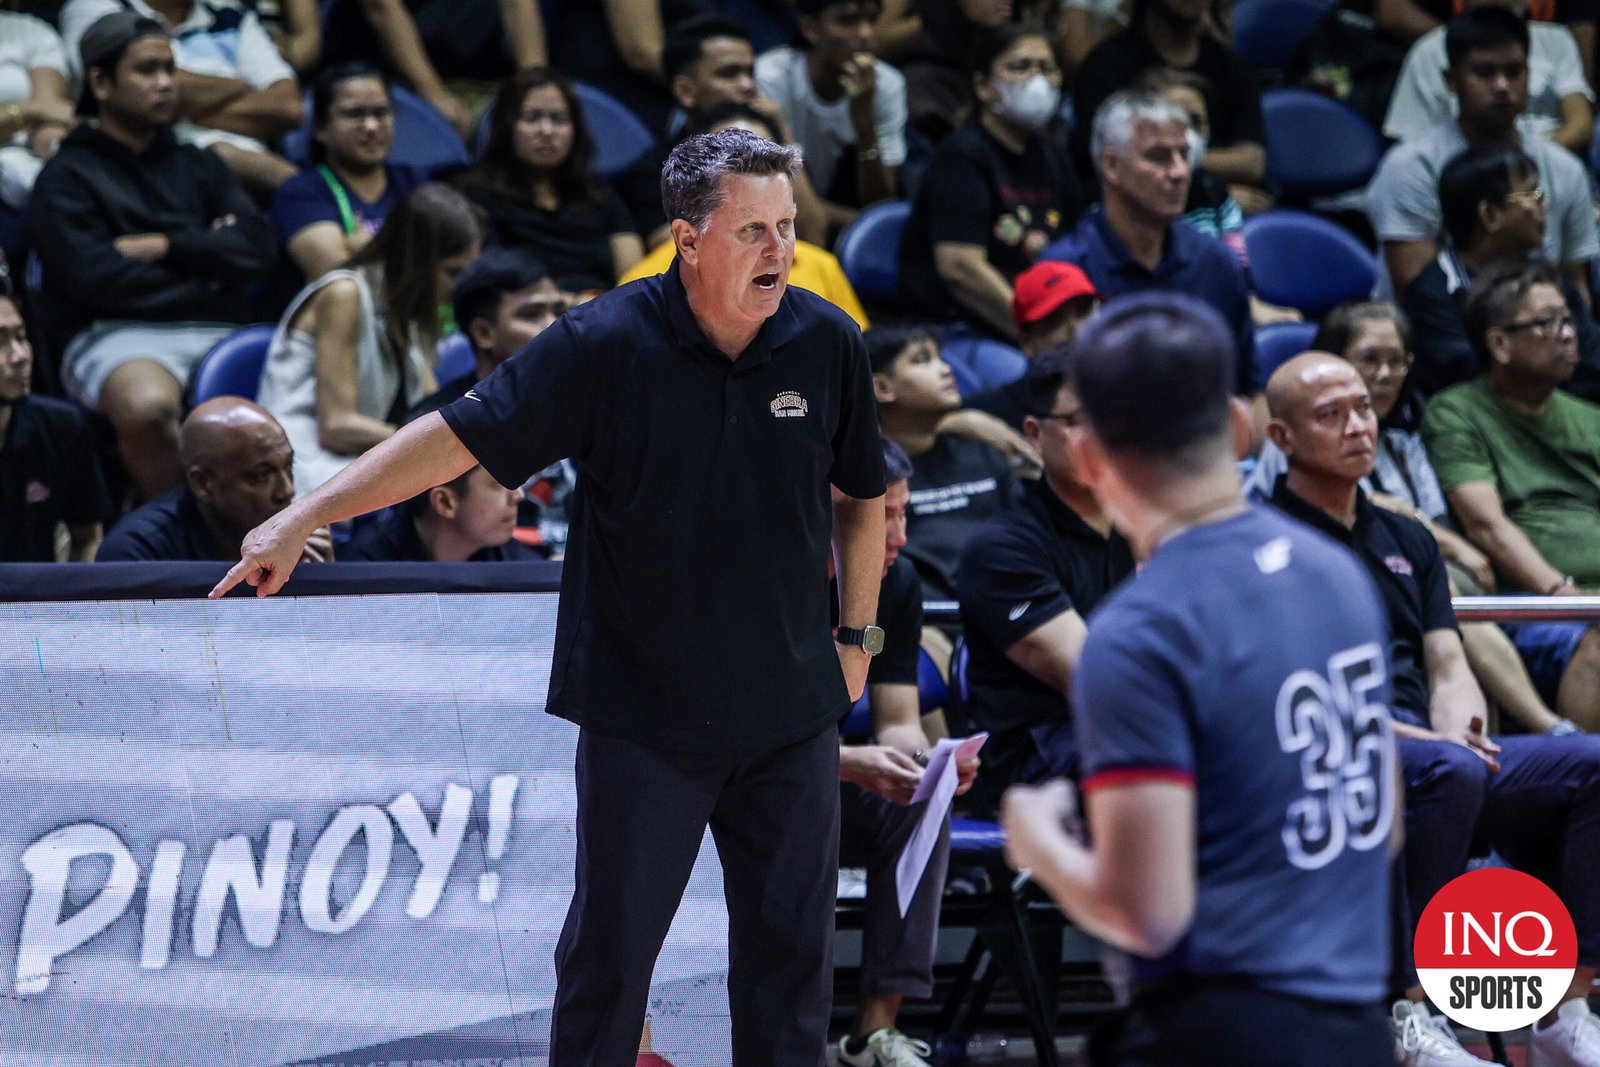 Ginebra looks to work their way out of middle of the pack